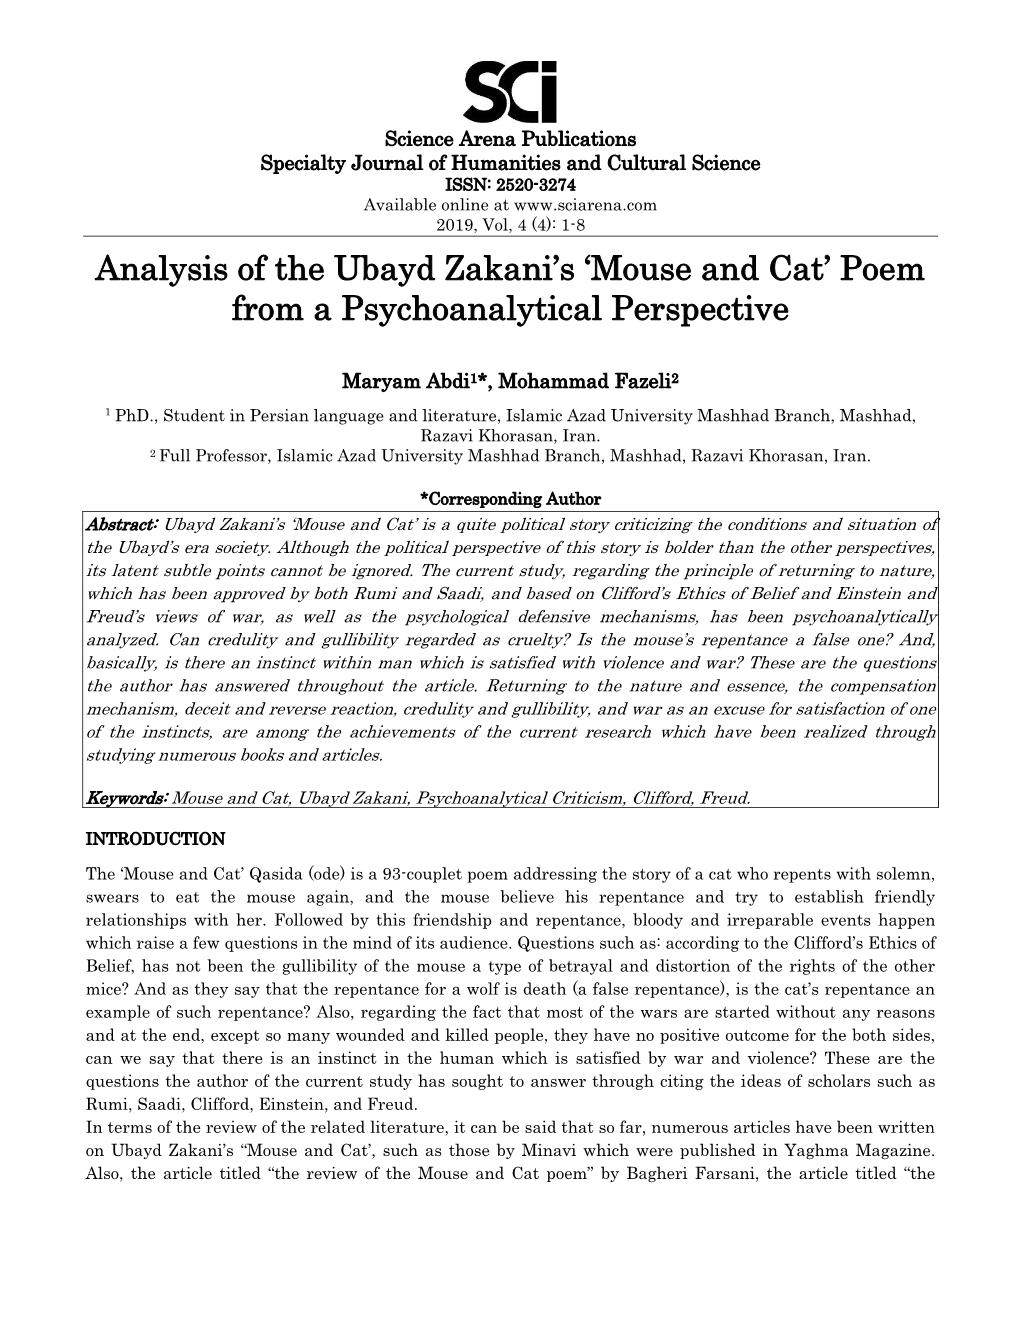 Analysis of the Ubayd Zakani's 'Mouse and Cat' Poem from A